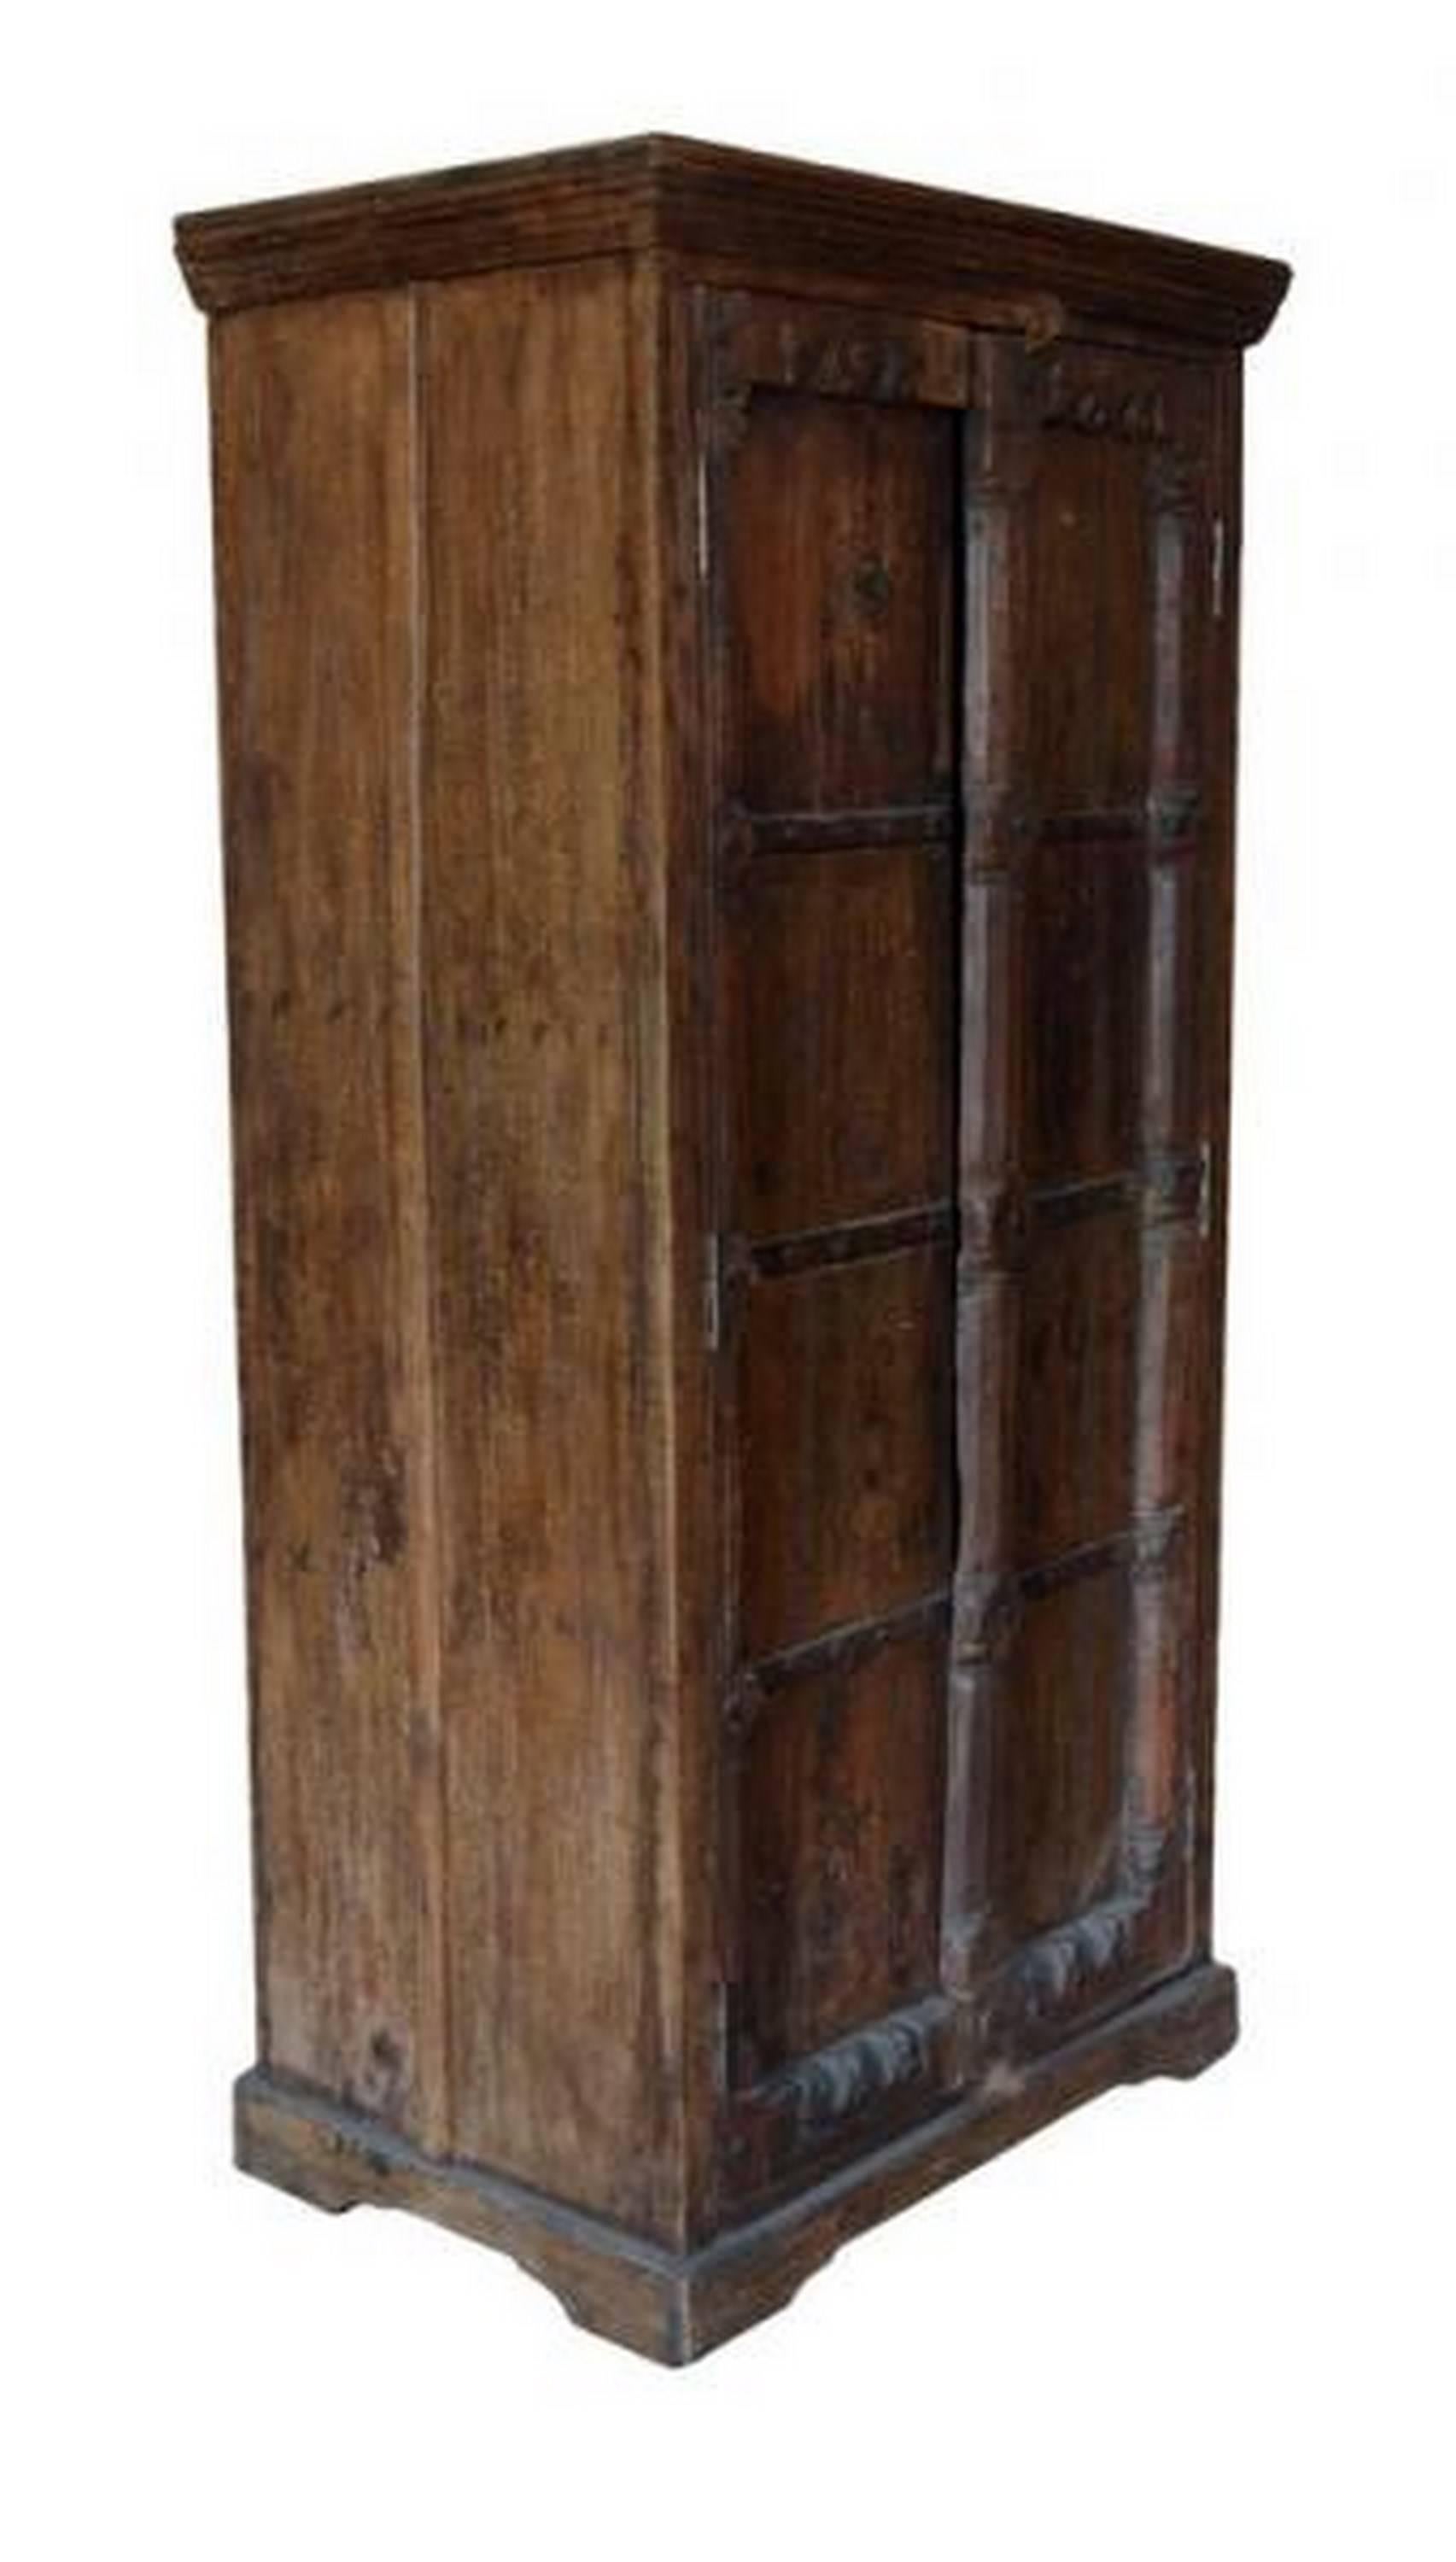 This handsome 20th century Indian wooden armoire features two doors opening to reveal three inner shelves. Its hand-carved doors display delicate Indian patterns, such as stylized flowers on the crosstie. The panels are fixed with metal hardware and